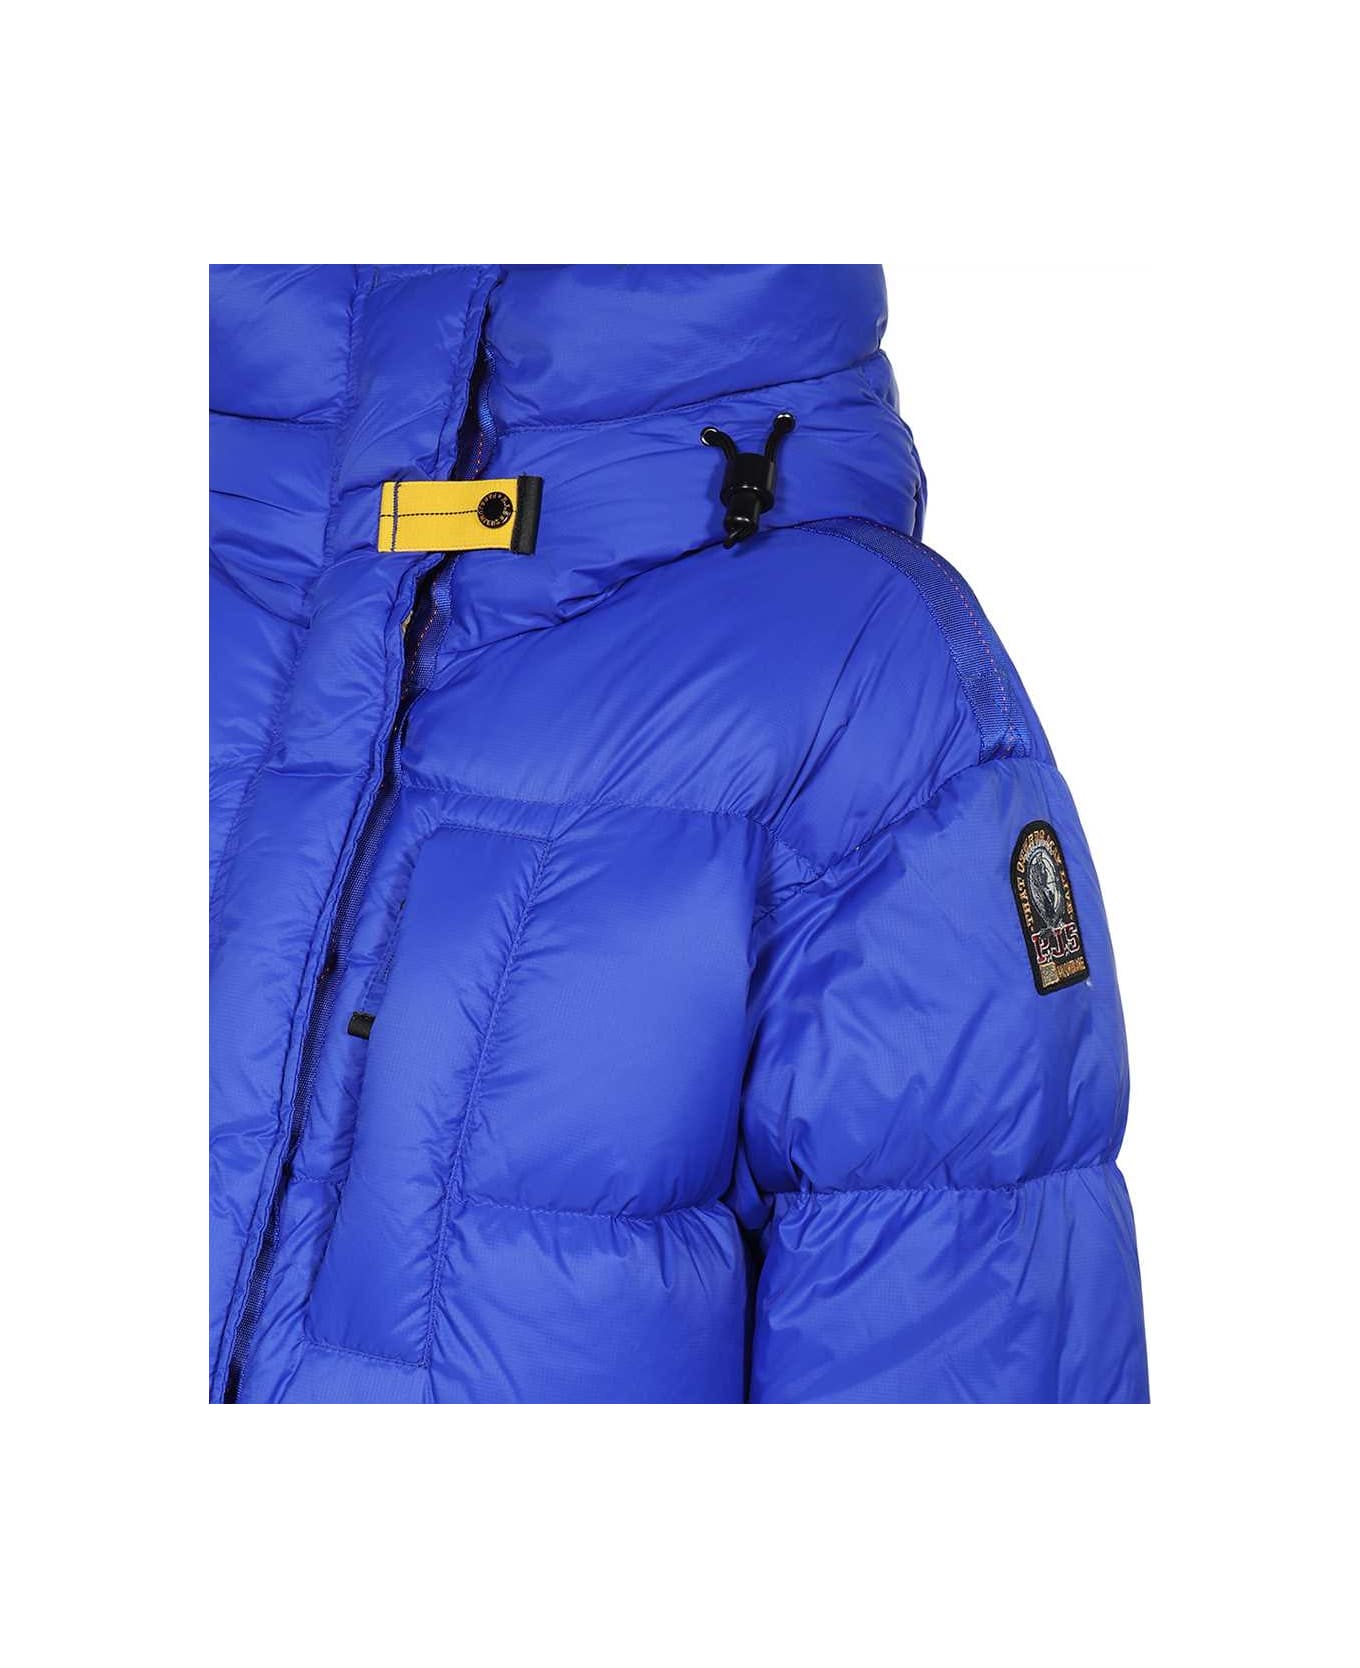 Parajumpers Eira Long Hooded Down Jacket - blue